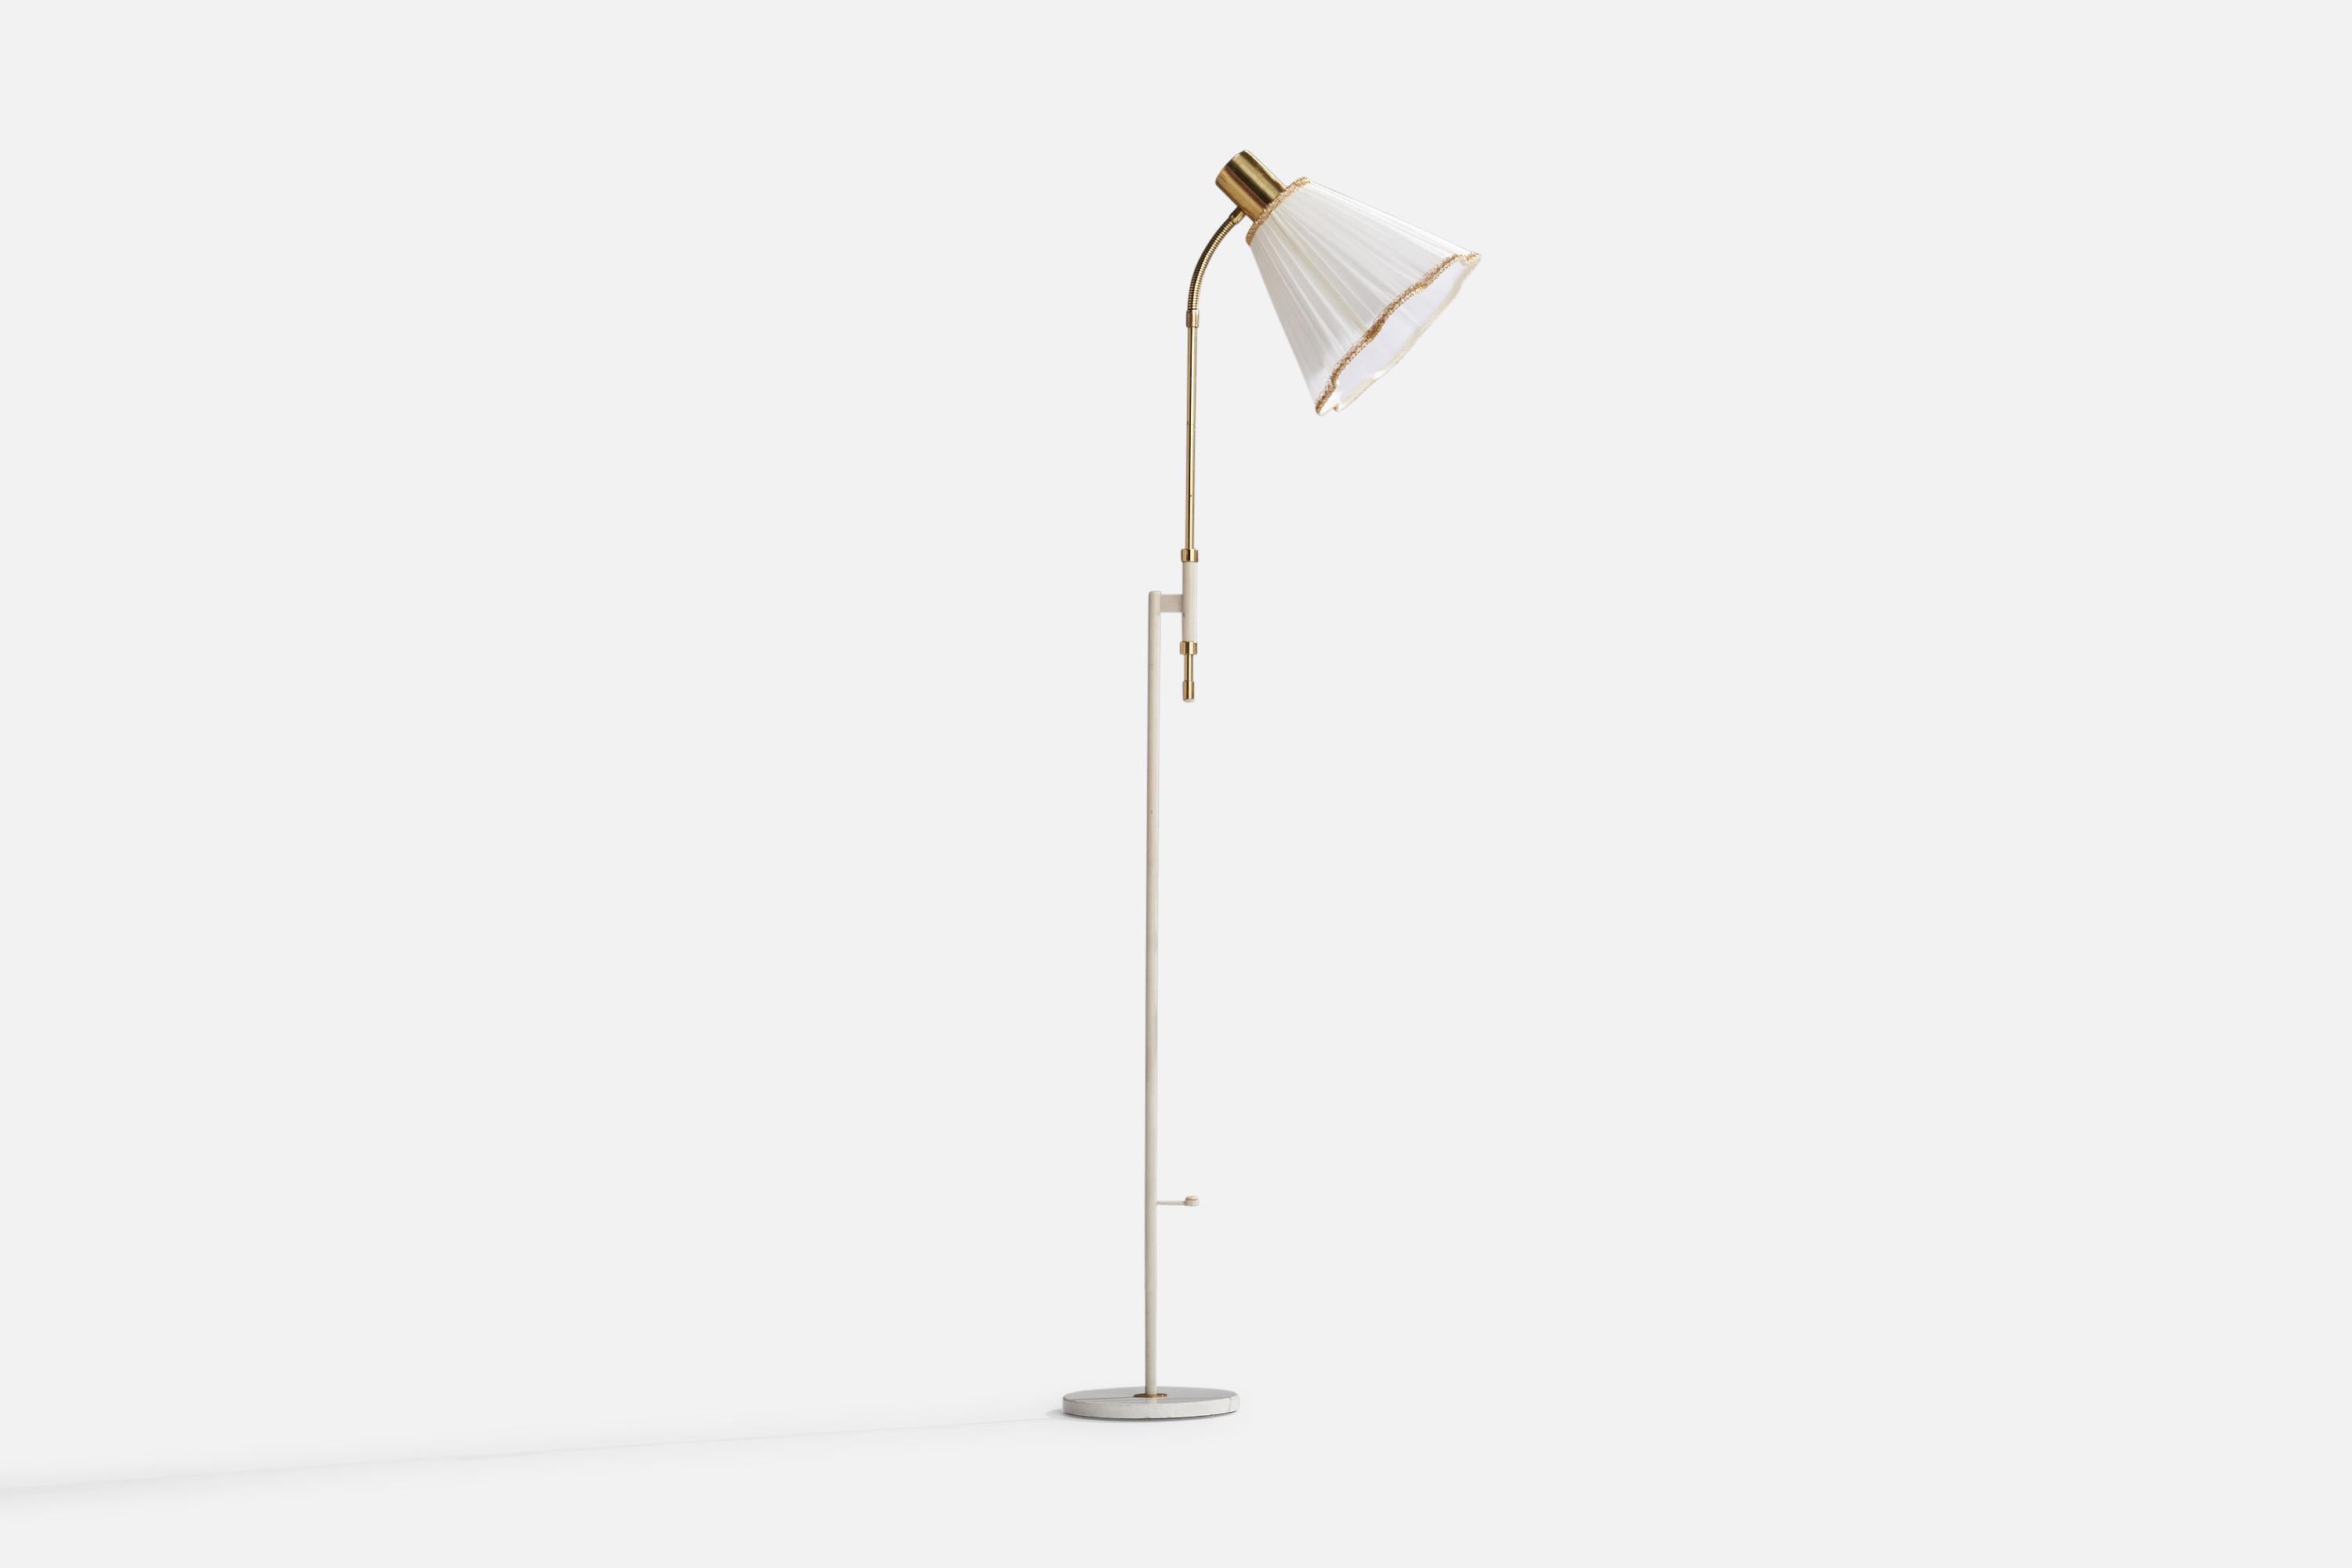 A brass, light-grey-lacquered metal and white fabric floor lamp designed and produced by Möllers Armatur Elektriska, Sweden, 1950s.

Please note cord feeds from bottom of stem connected to socket.
Overall Dimensions (inches): 56” H x 10”  W x 17”